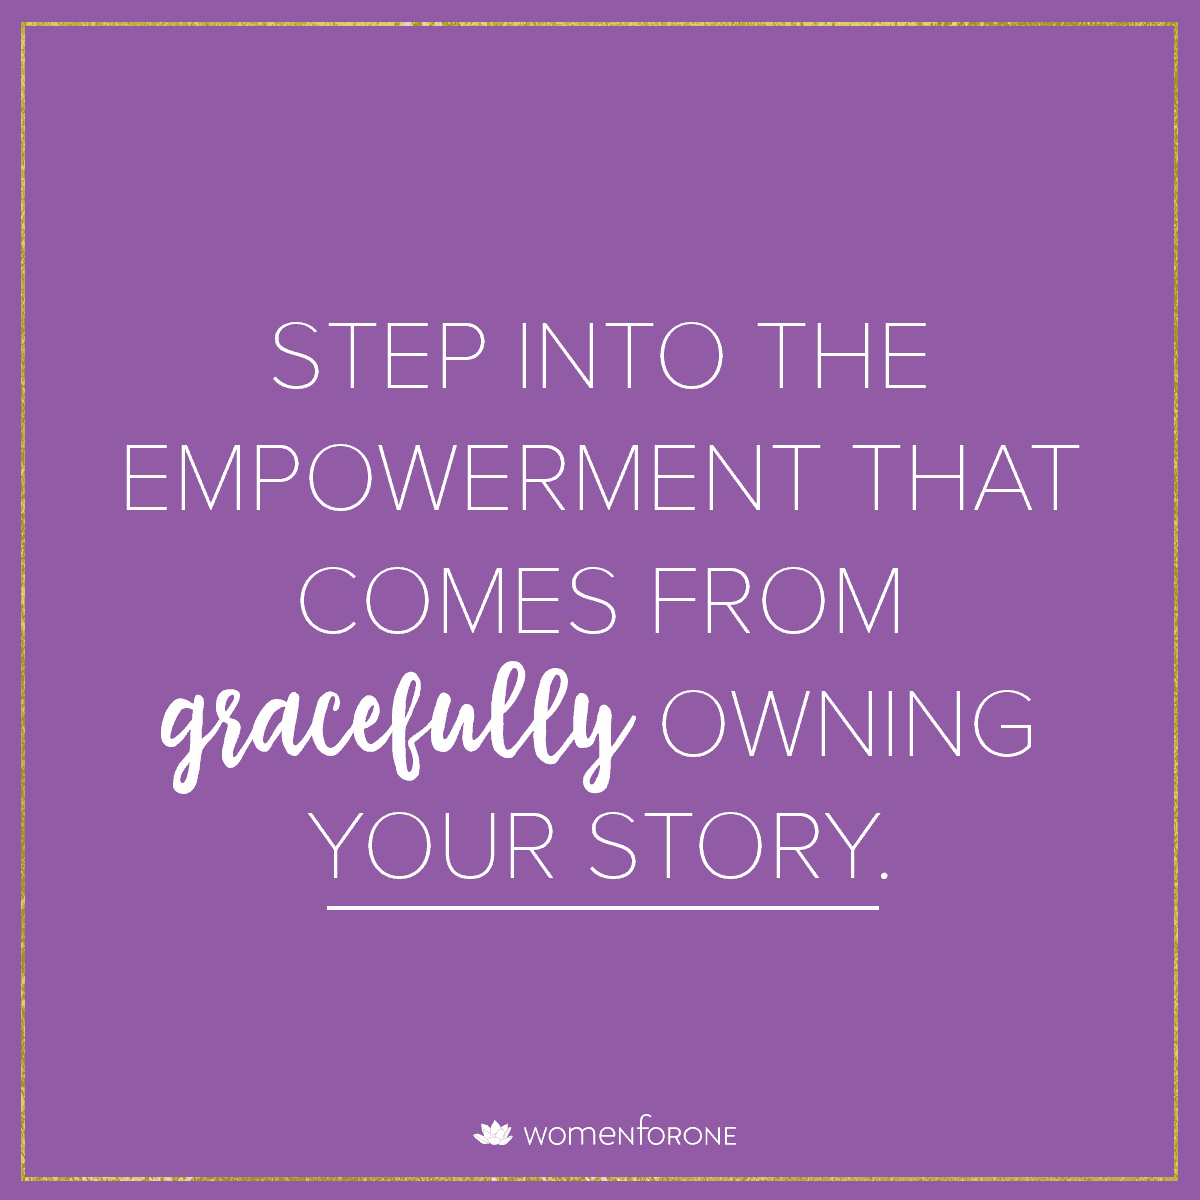 Step into the empowerment that comes from gracefully owning your story